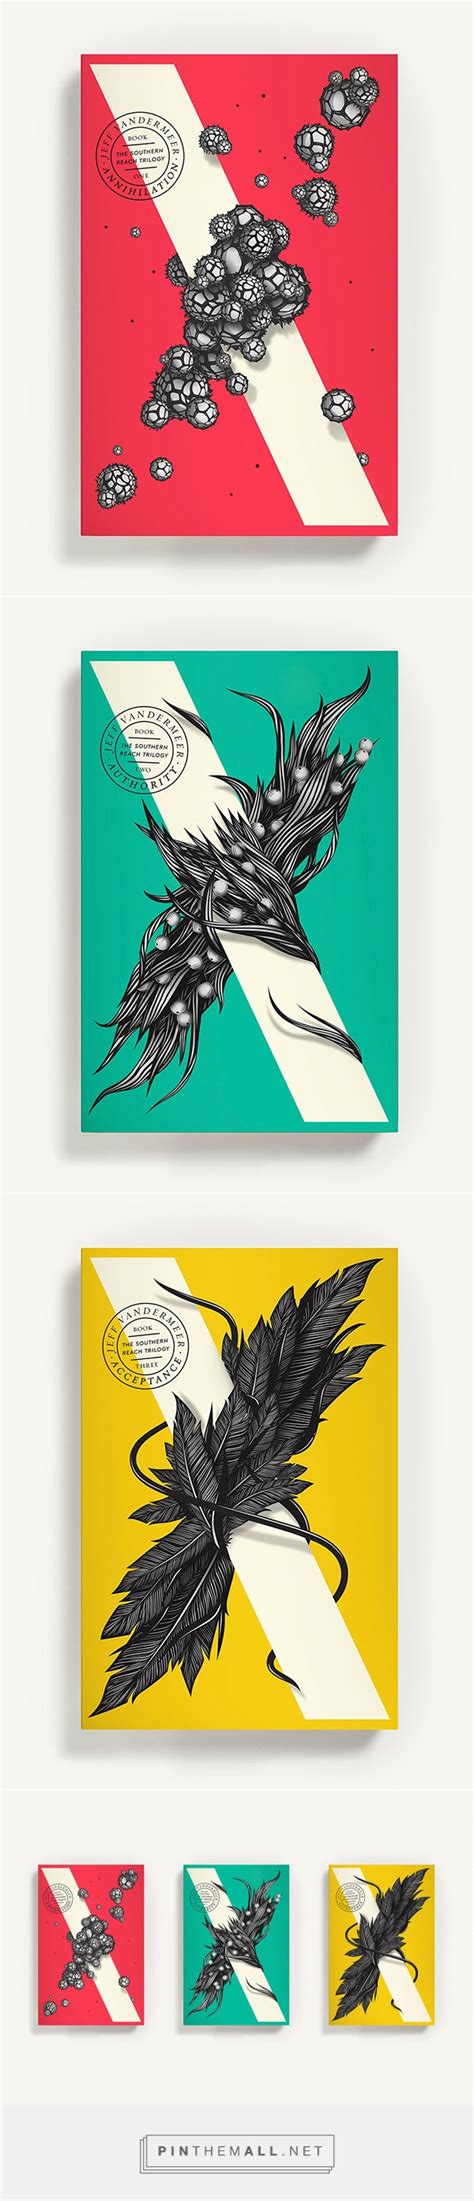 southern reach trilogy  behance created  httpspinthemallnet graphic design